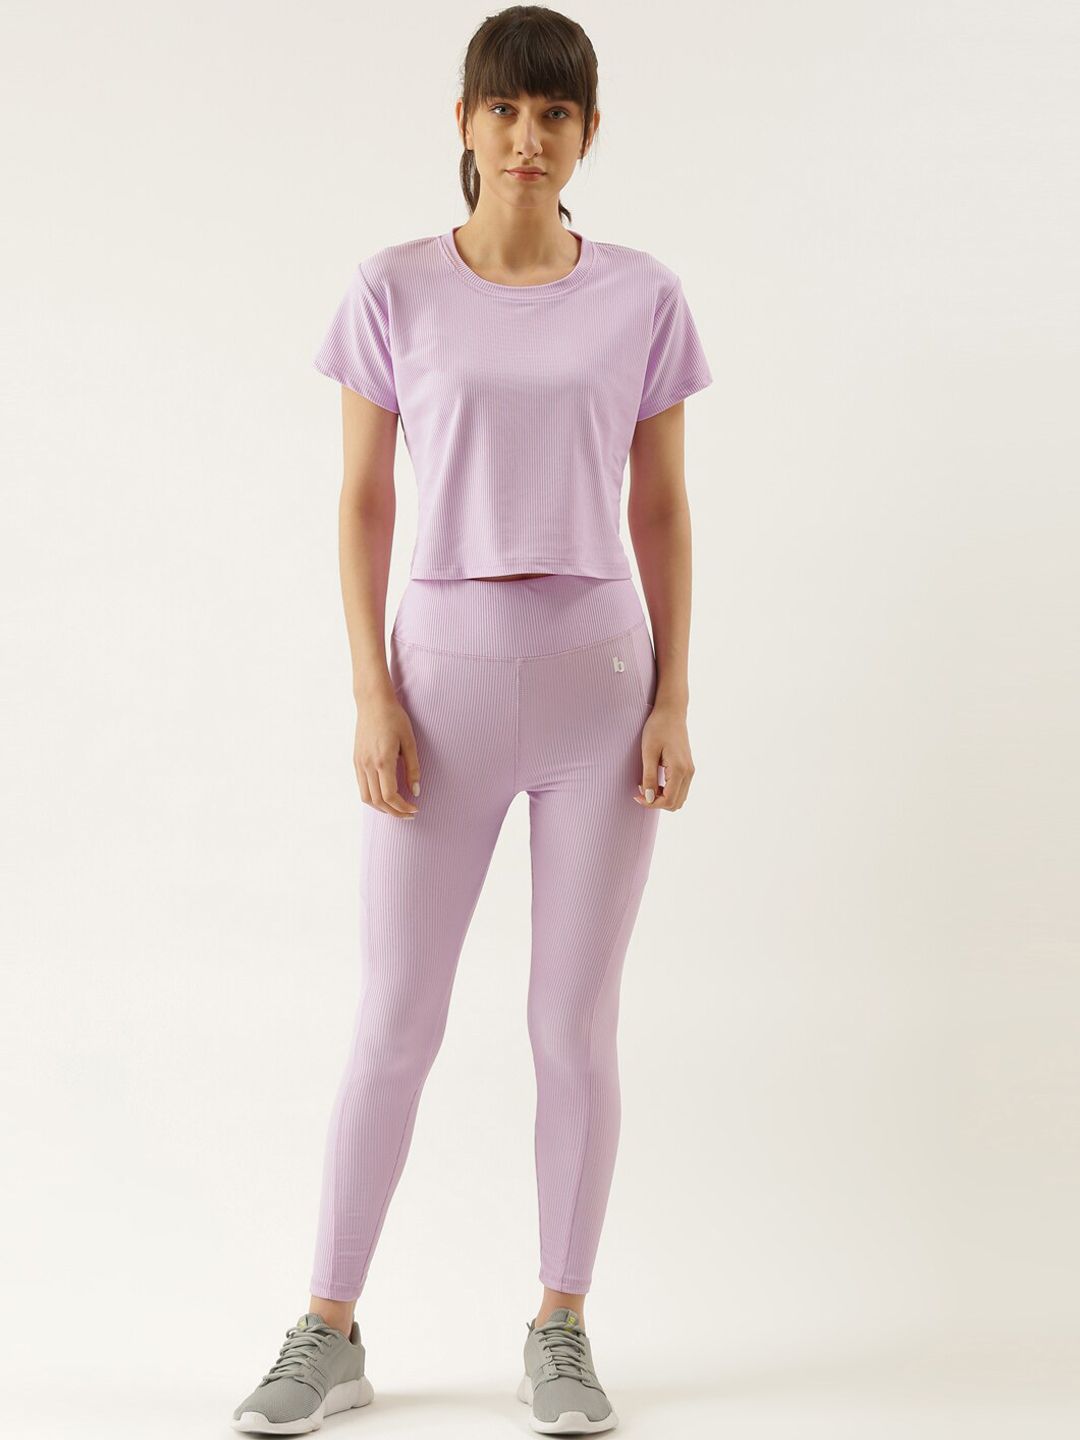 Bannos Swagger Women Lavender Solid Tracksuit Price in India